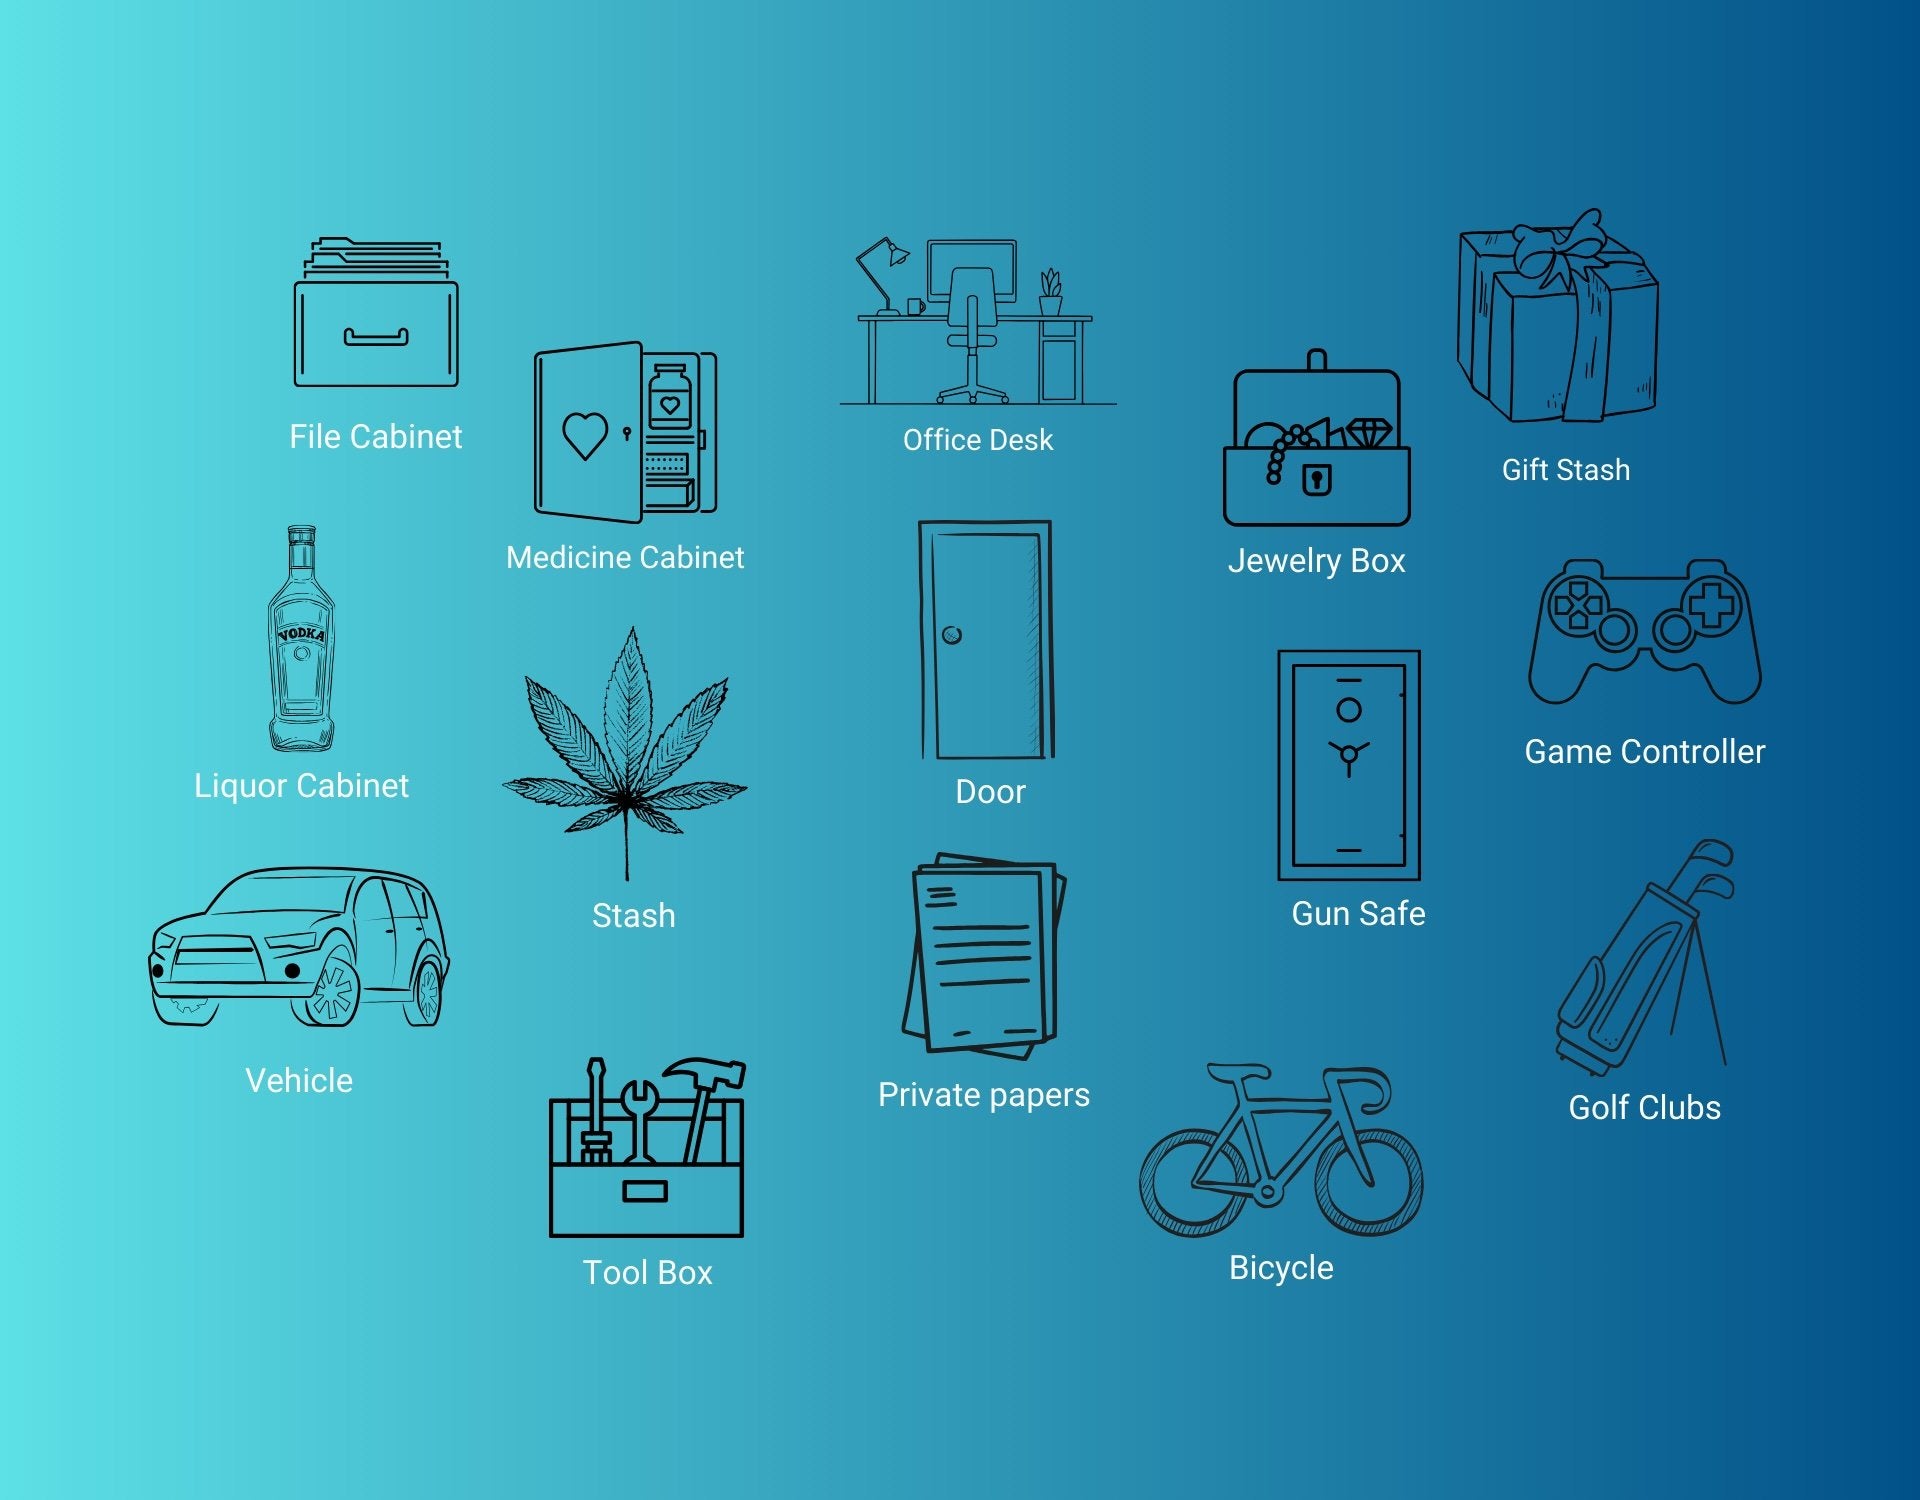 Graphic of the many place to use Kini Wireless Motion Sensor- File Cabinet, Medicine Cabinet, Office Desk, Jewelry Box, Gift Stash, Liquor Cabinet, Cannabis, Door, Game Controller, Vehicle, Tool Box, Private Papers, Bicycle, Golf Clubs